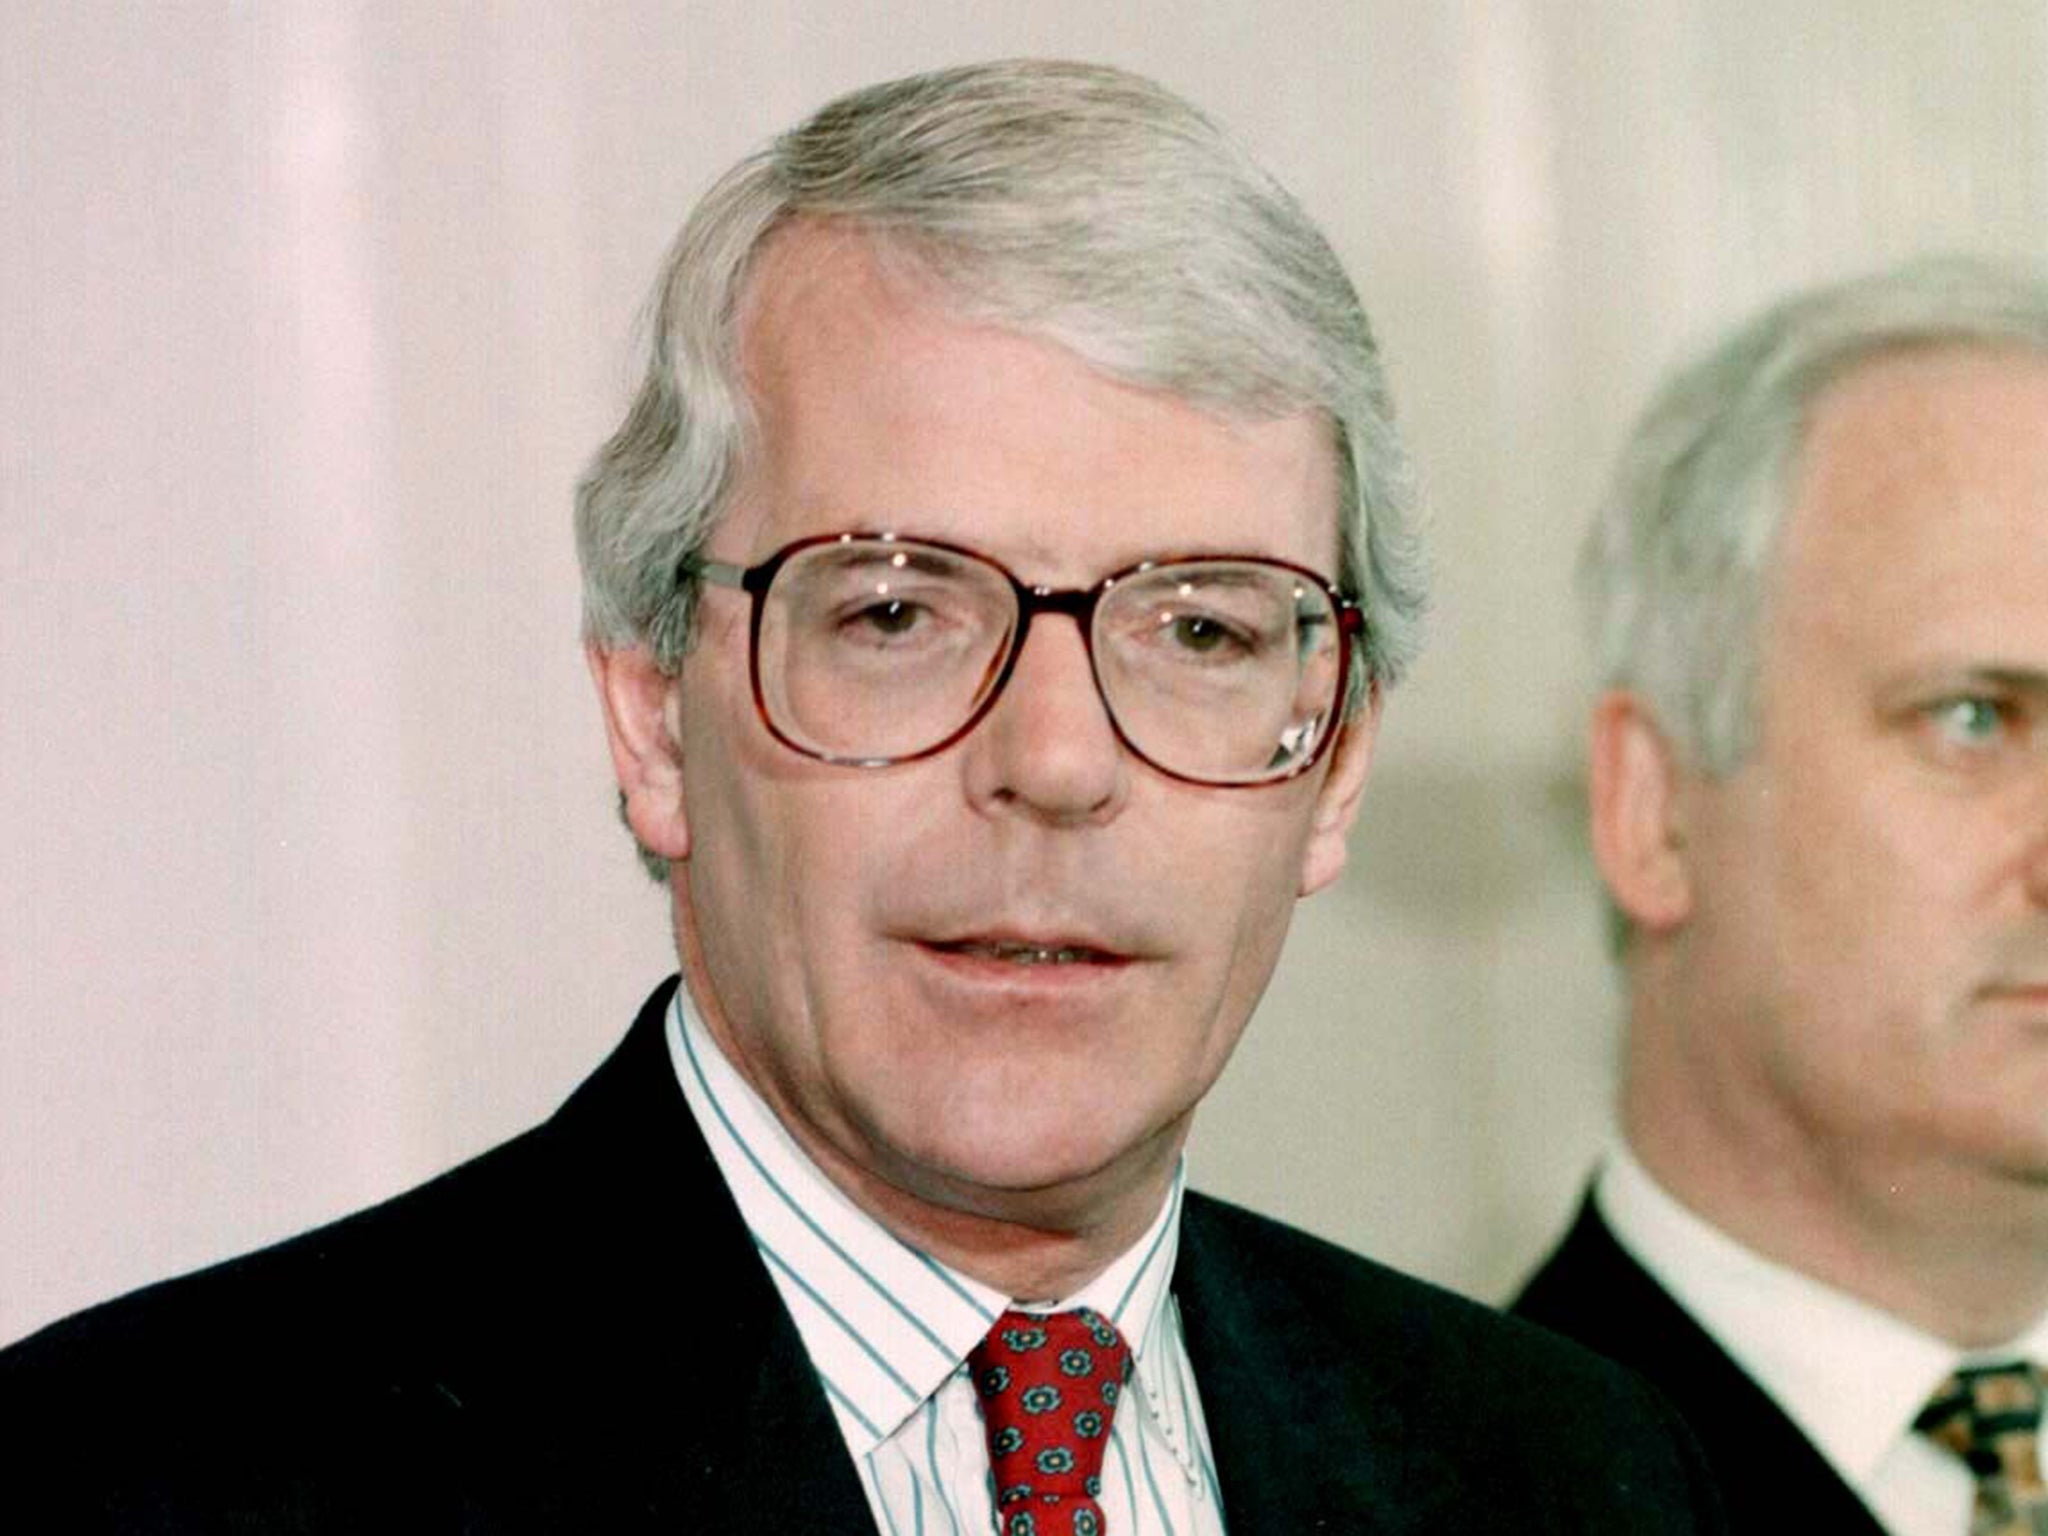 John Major as prime minister in the Nineties. He later admitted: 'I was much too sensitive from time to time about what the press wrote.'